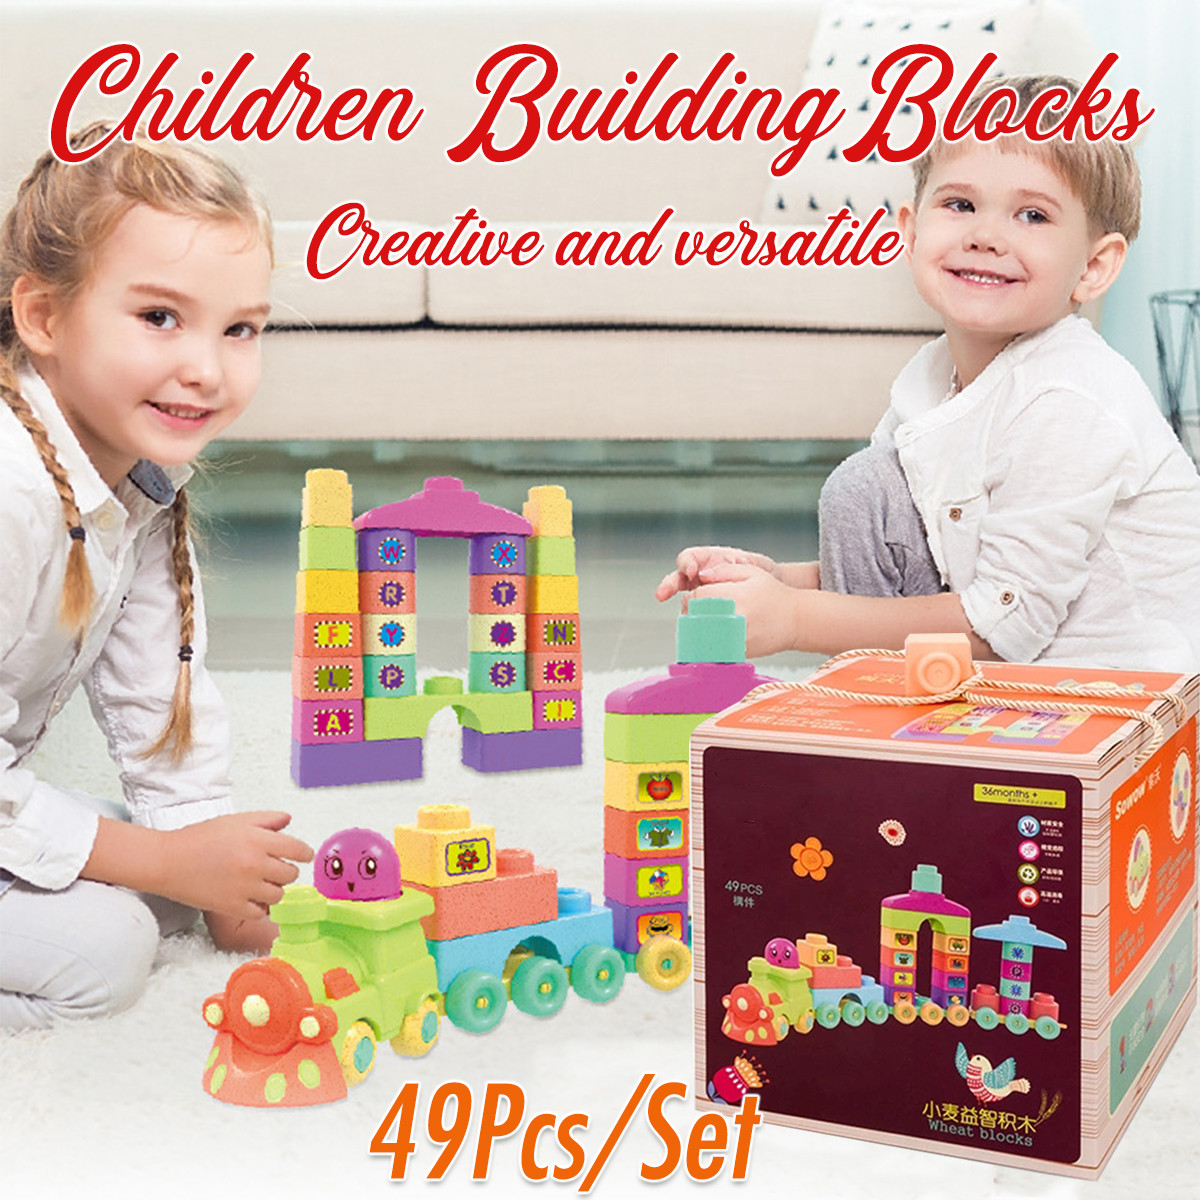 49PCSSET-Childrens-Building-Blocks-Toys-Base-Plate-Safety-Skin-friendly-Early-Educational-Toy-Gift-1598205-1